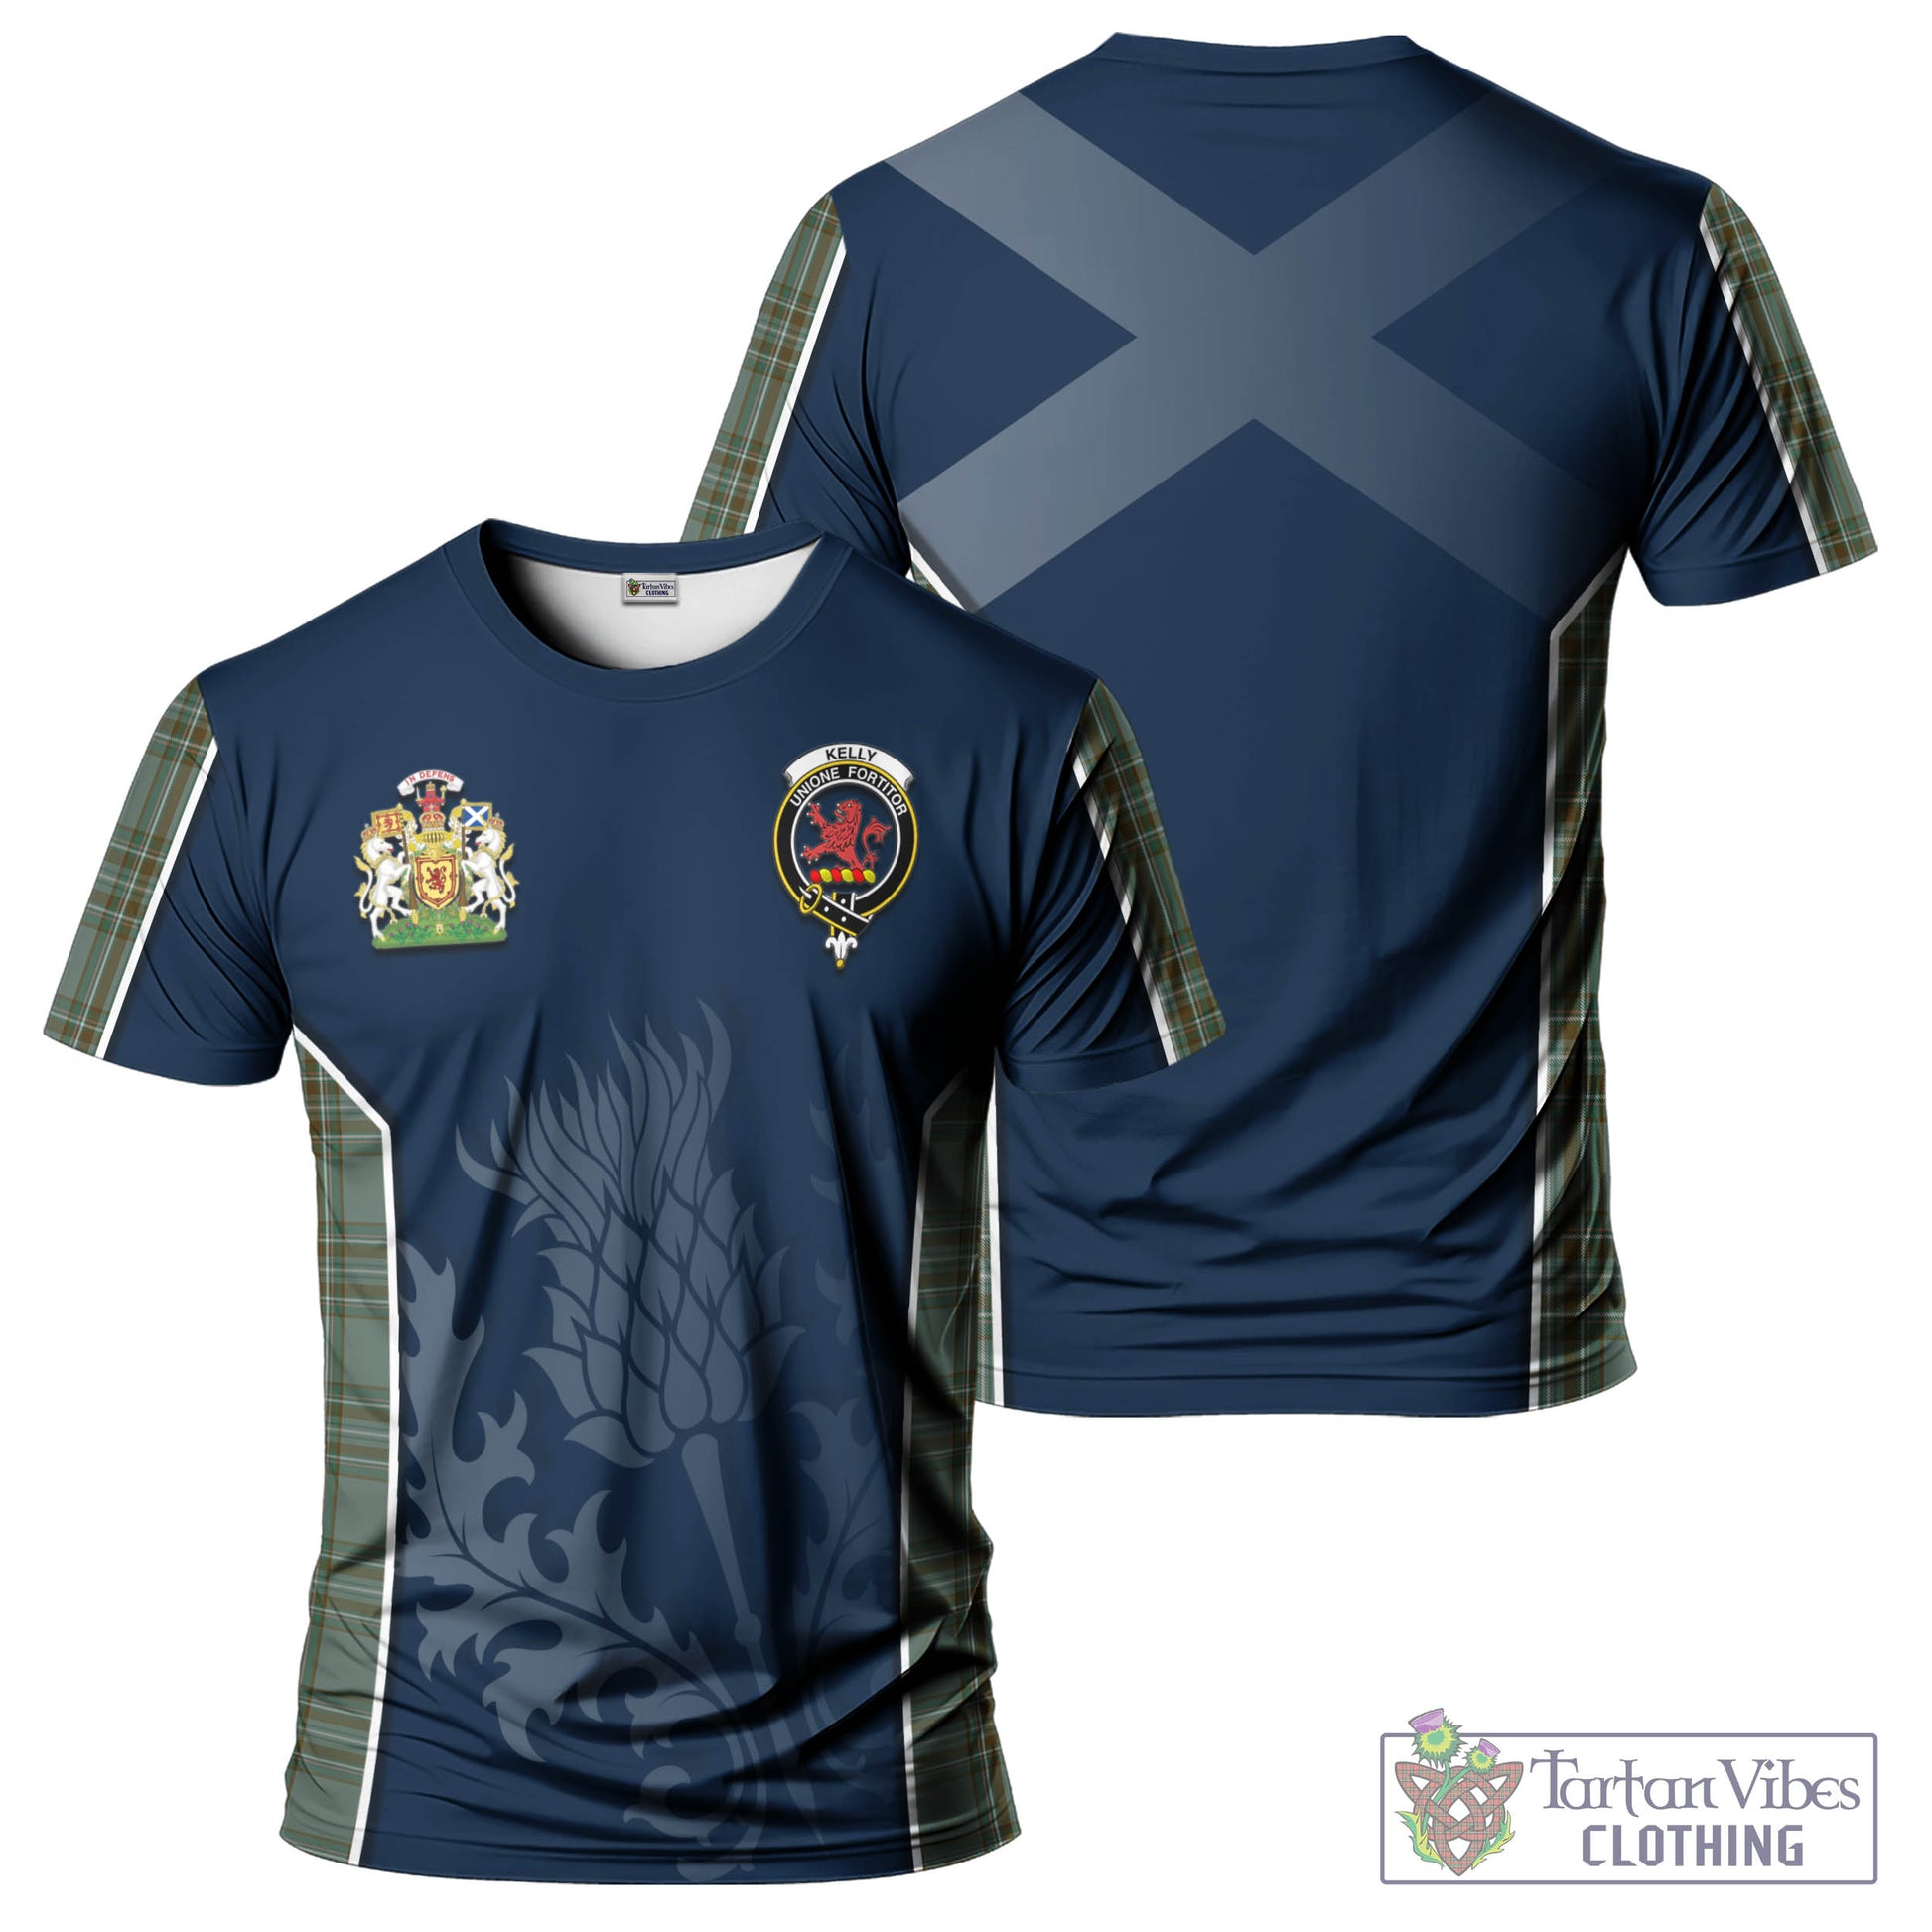 Tartan Vibes Clothing Kelly Dress Tartan T-Shirt with Family Crest and Scottish Thistle Vibes Sport Style